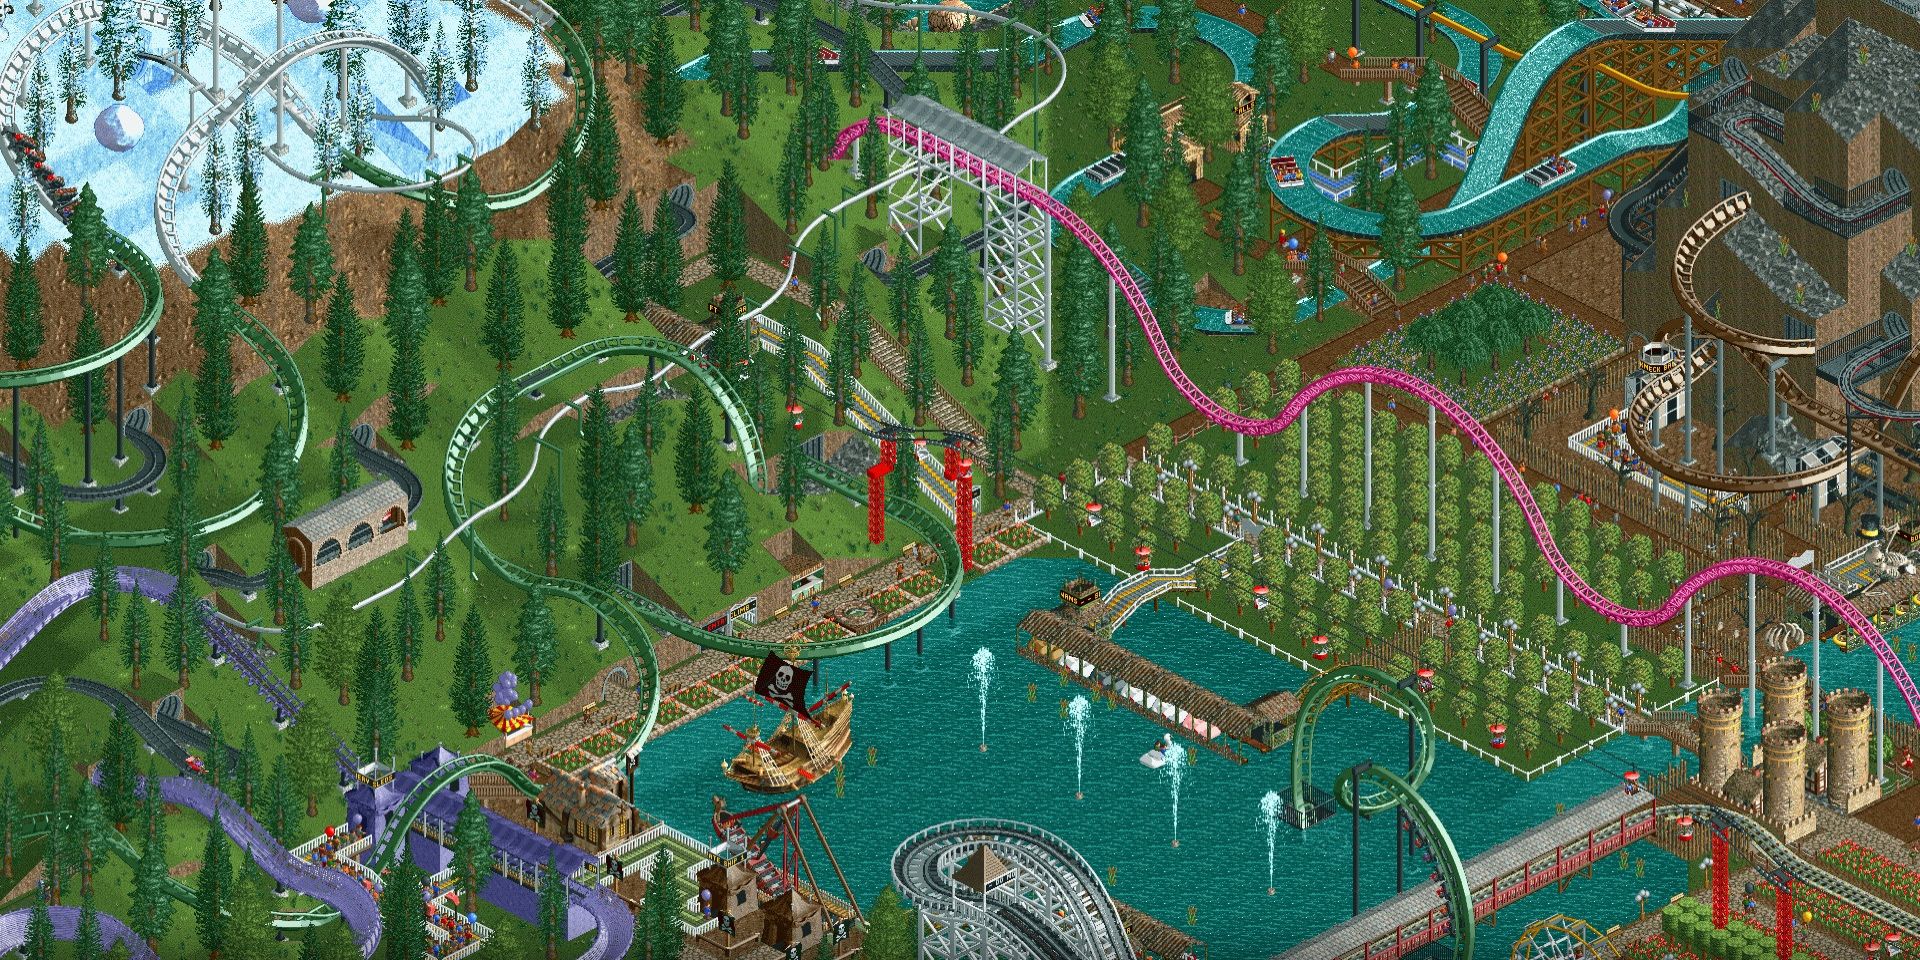 A screenshot of the video game RollerCoaster Tycoon 2.